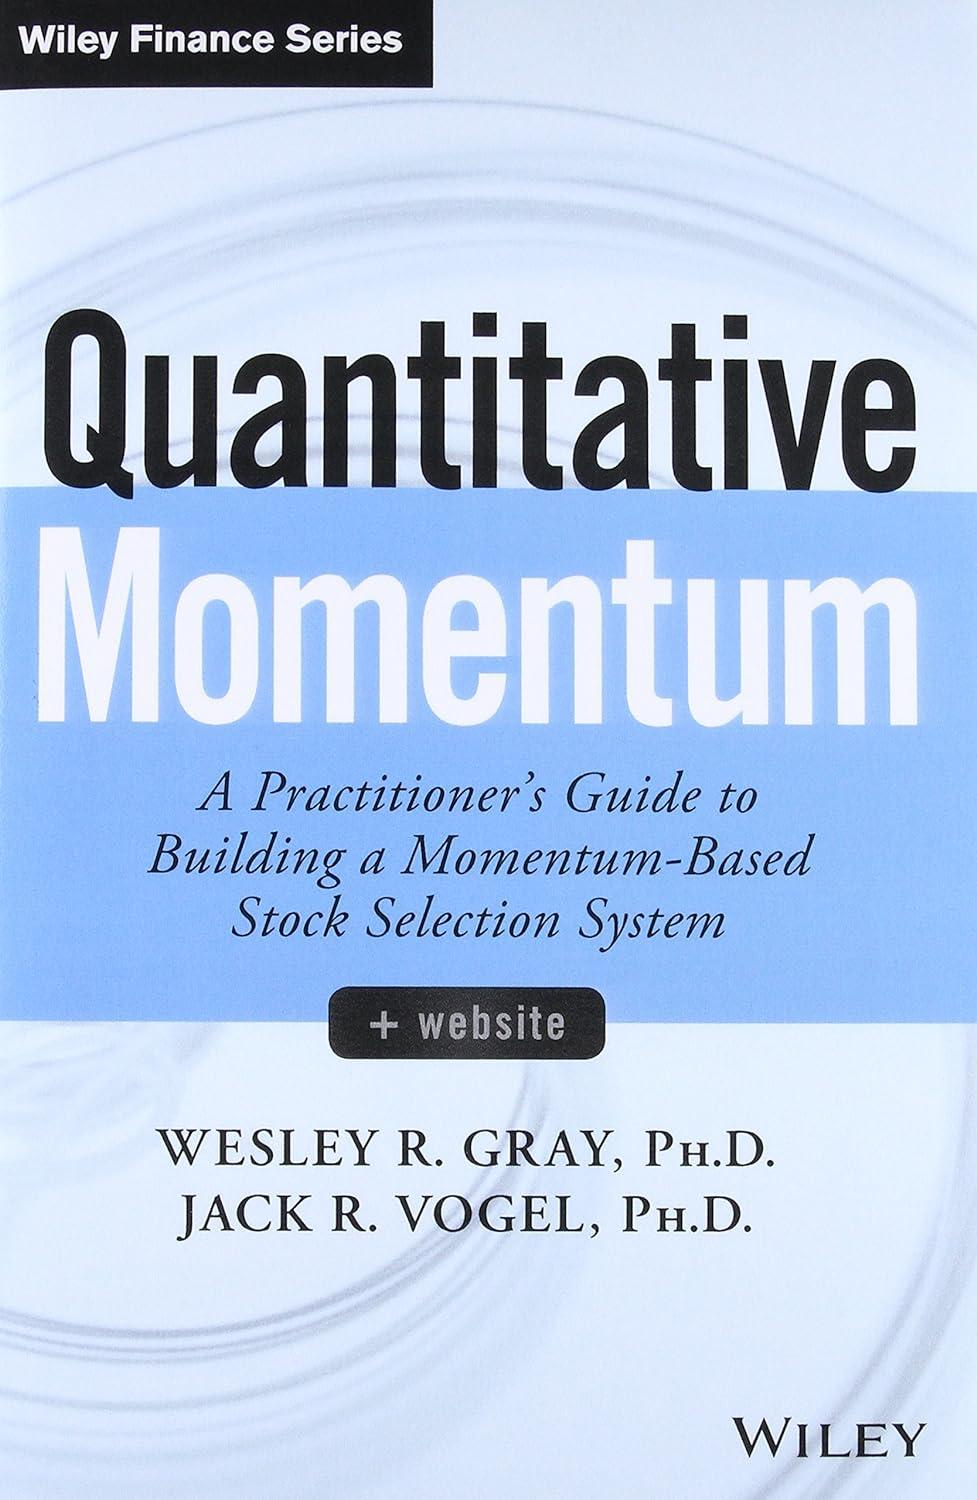 quantitative momentum a practitioners guide to building a momentum-based stock selection system 1st edition